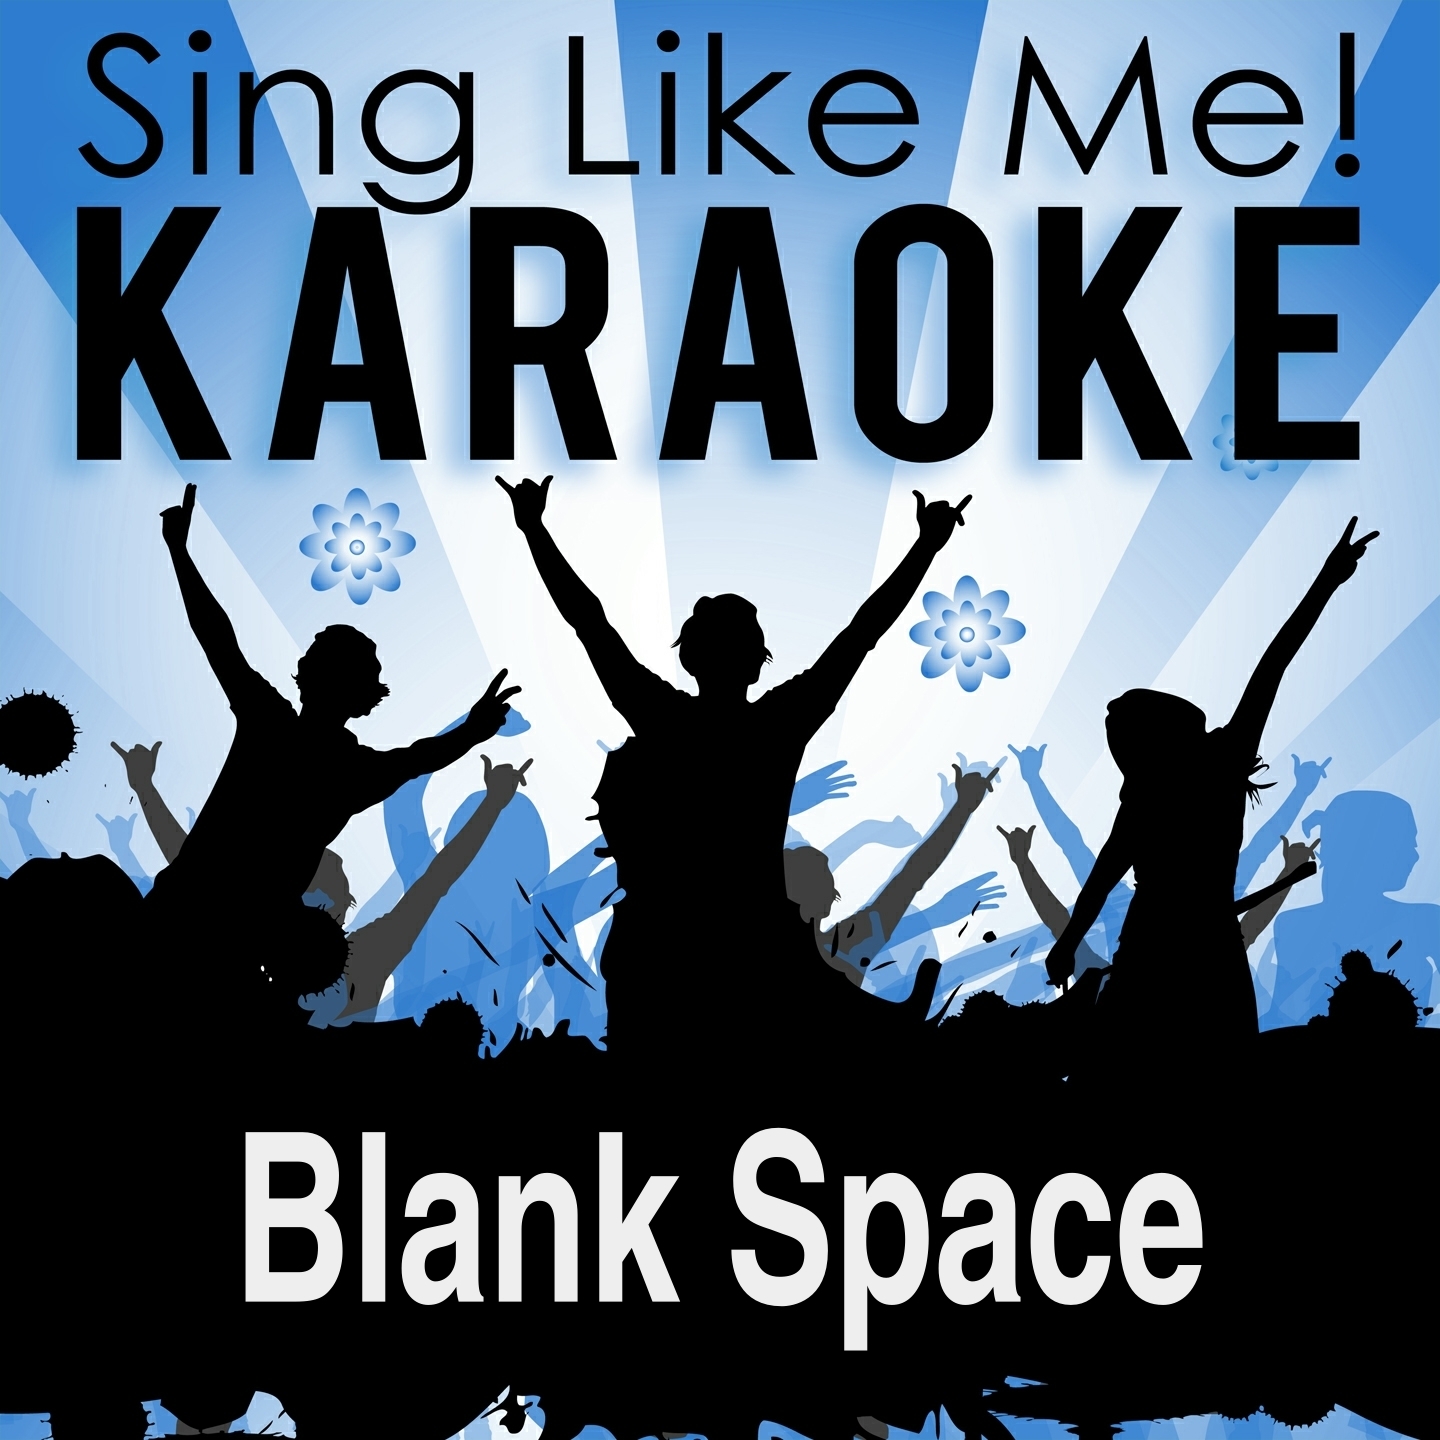 Blank Space (Karaoke Version with Guide Melody)